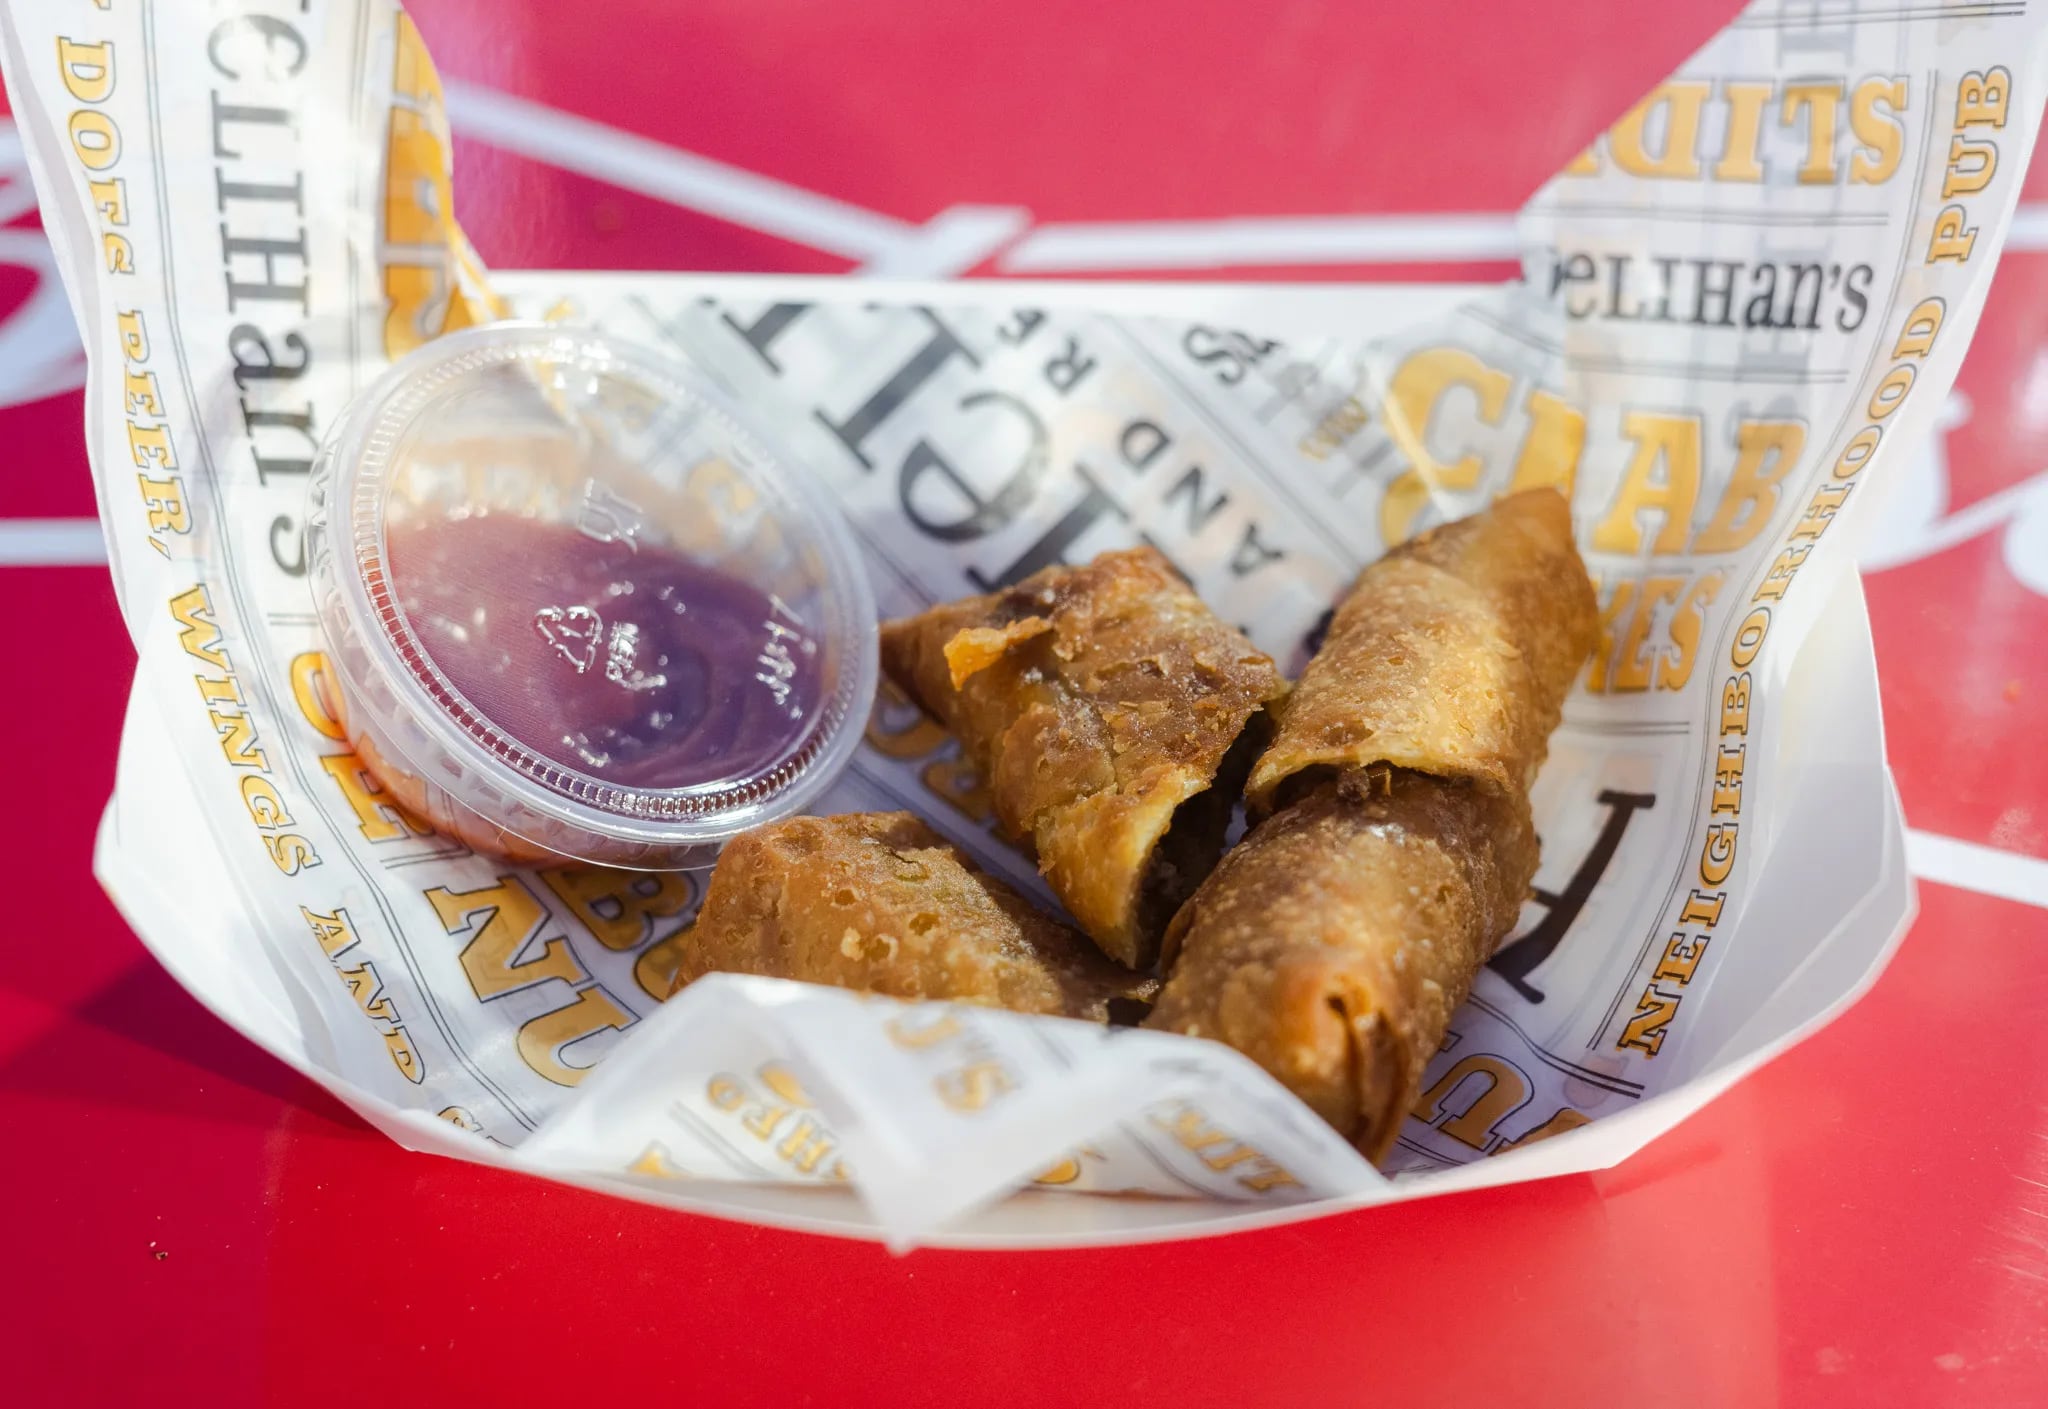 Cheesesteak egg rolls from P.J. Whelihan's at Citizens Bank Park.